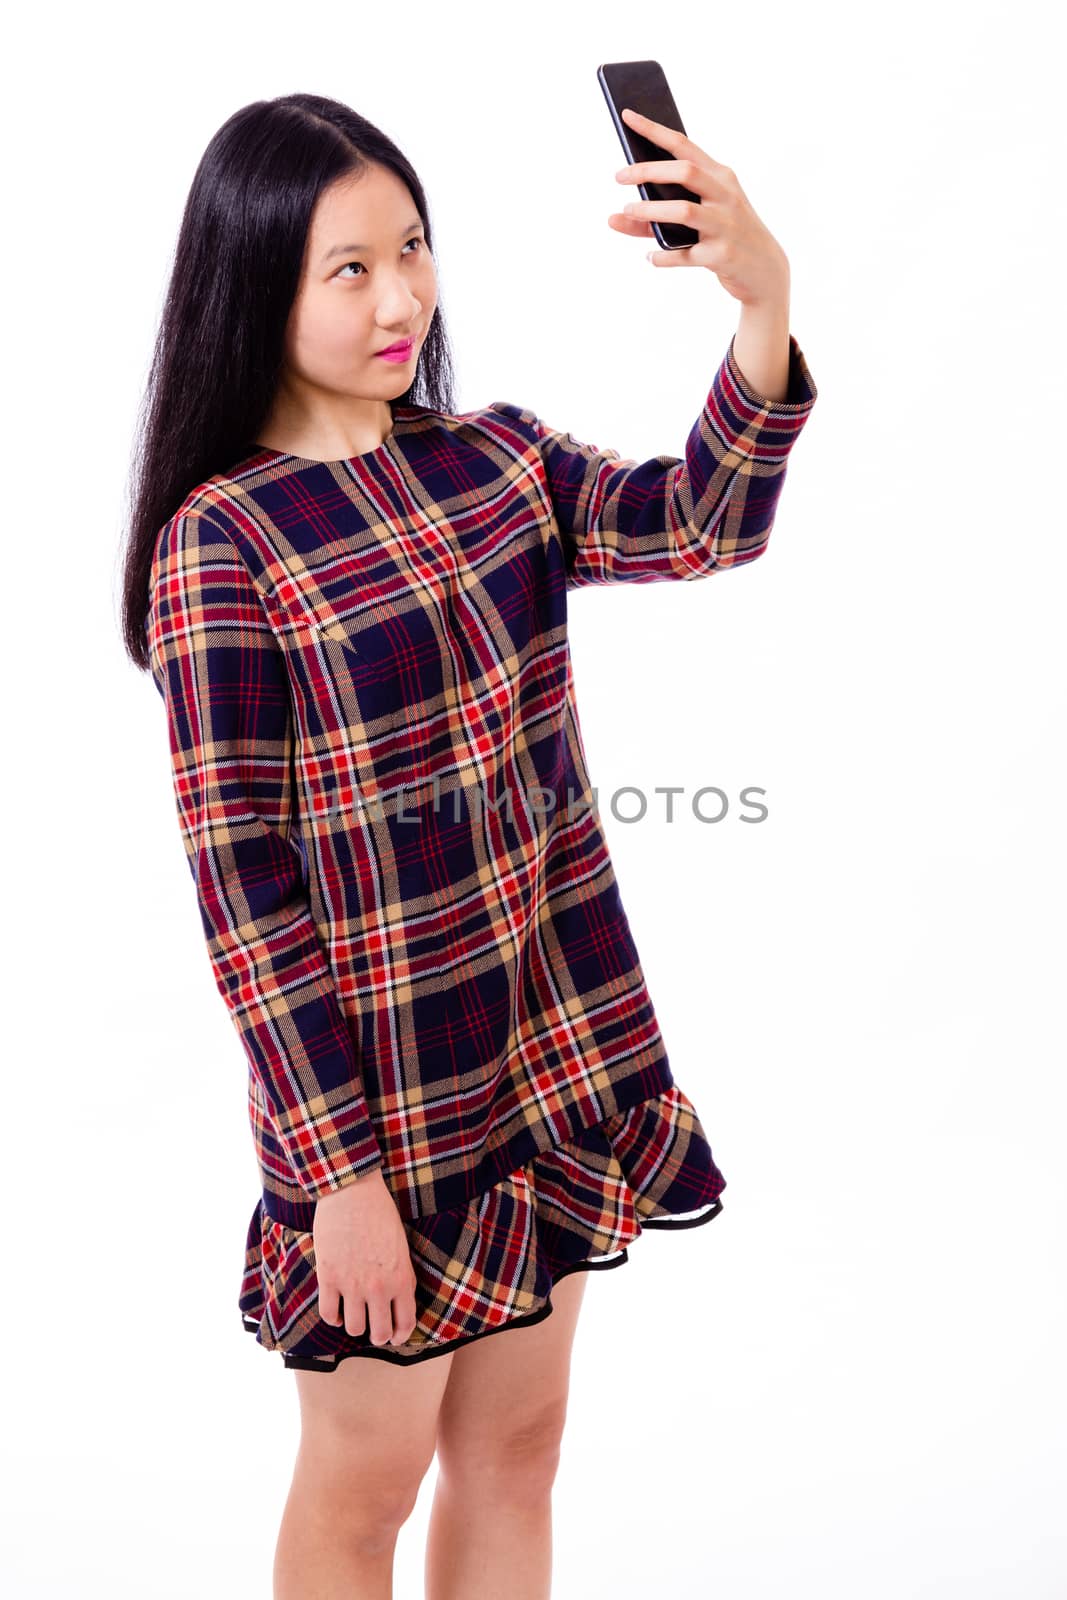 Chinese teenage girl in plaid dress taking selfie with smartphone